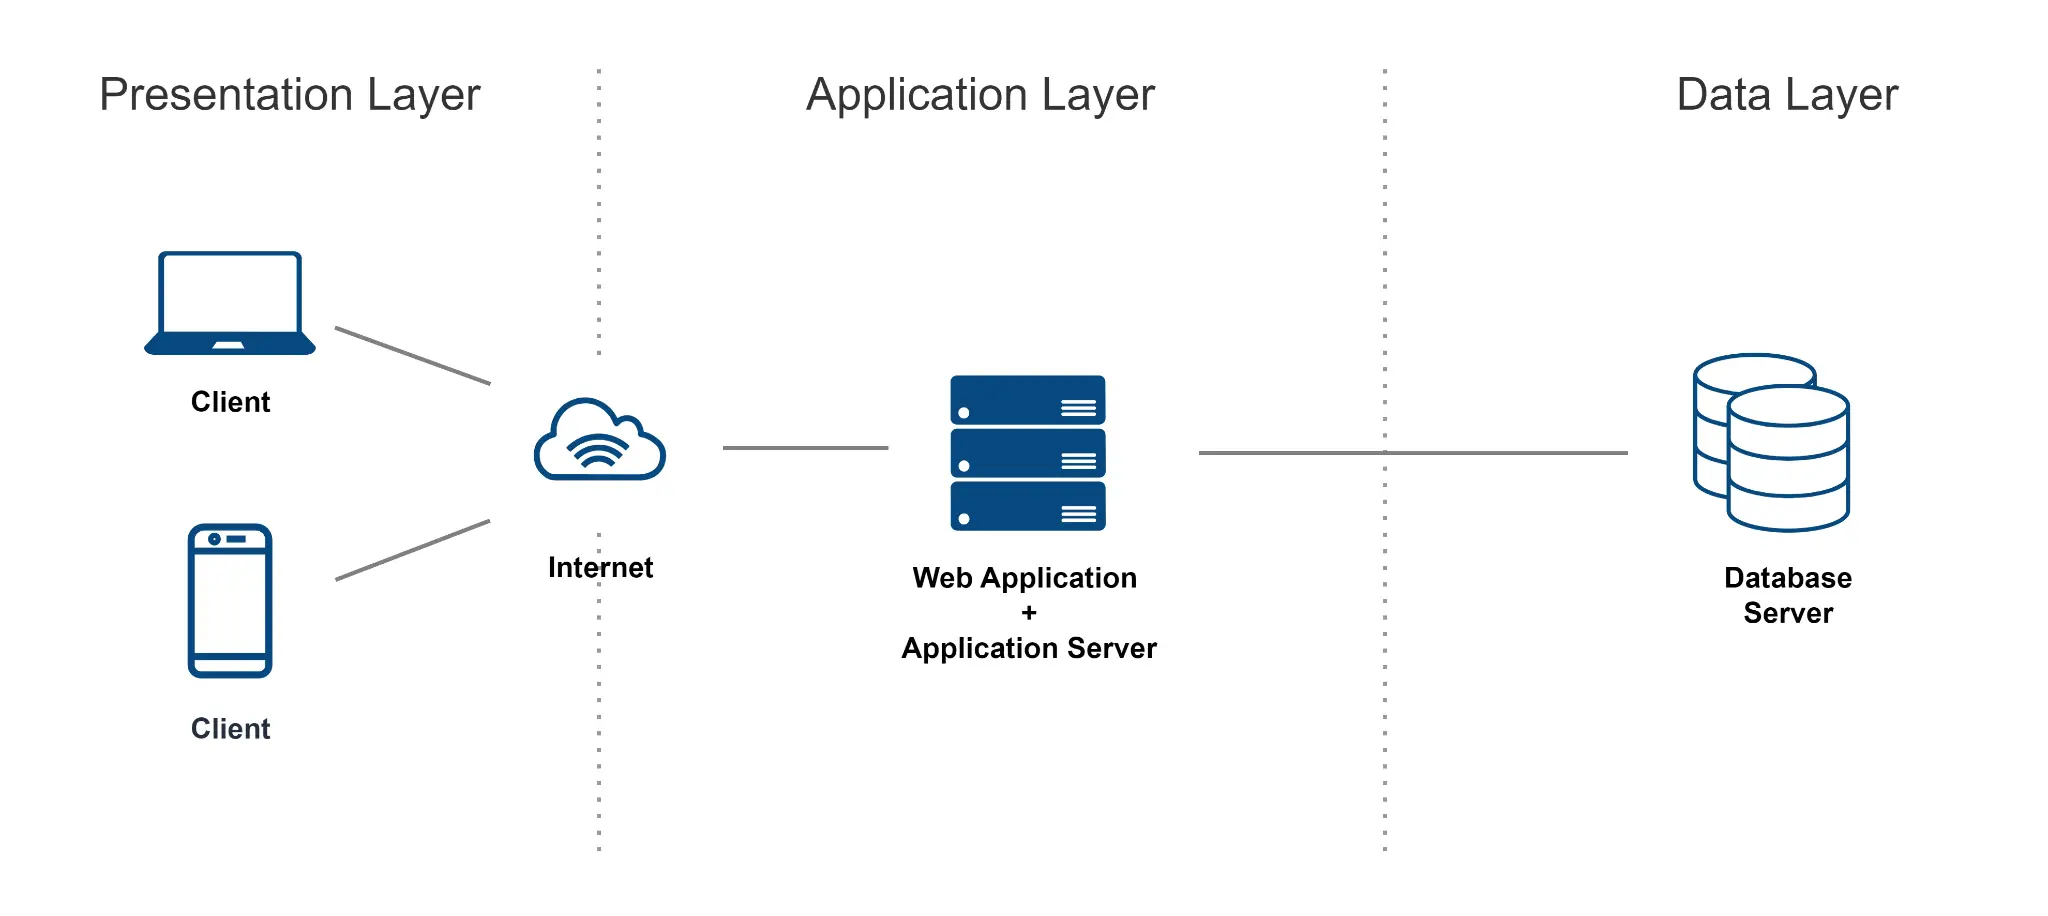 Layers of Web App Architecture